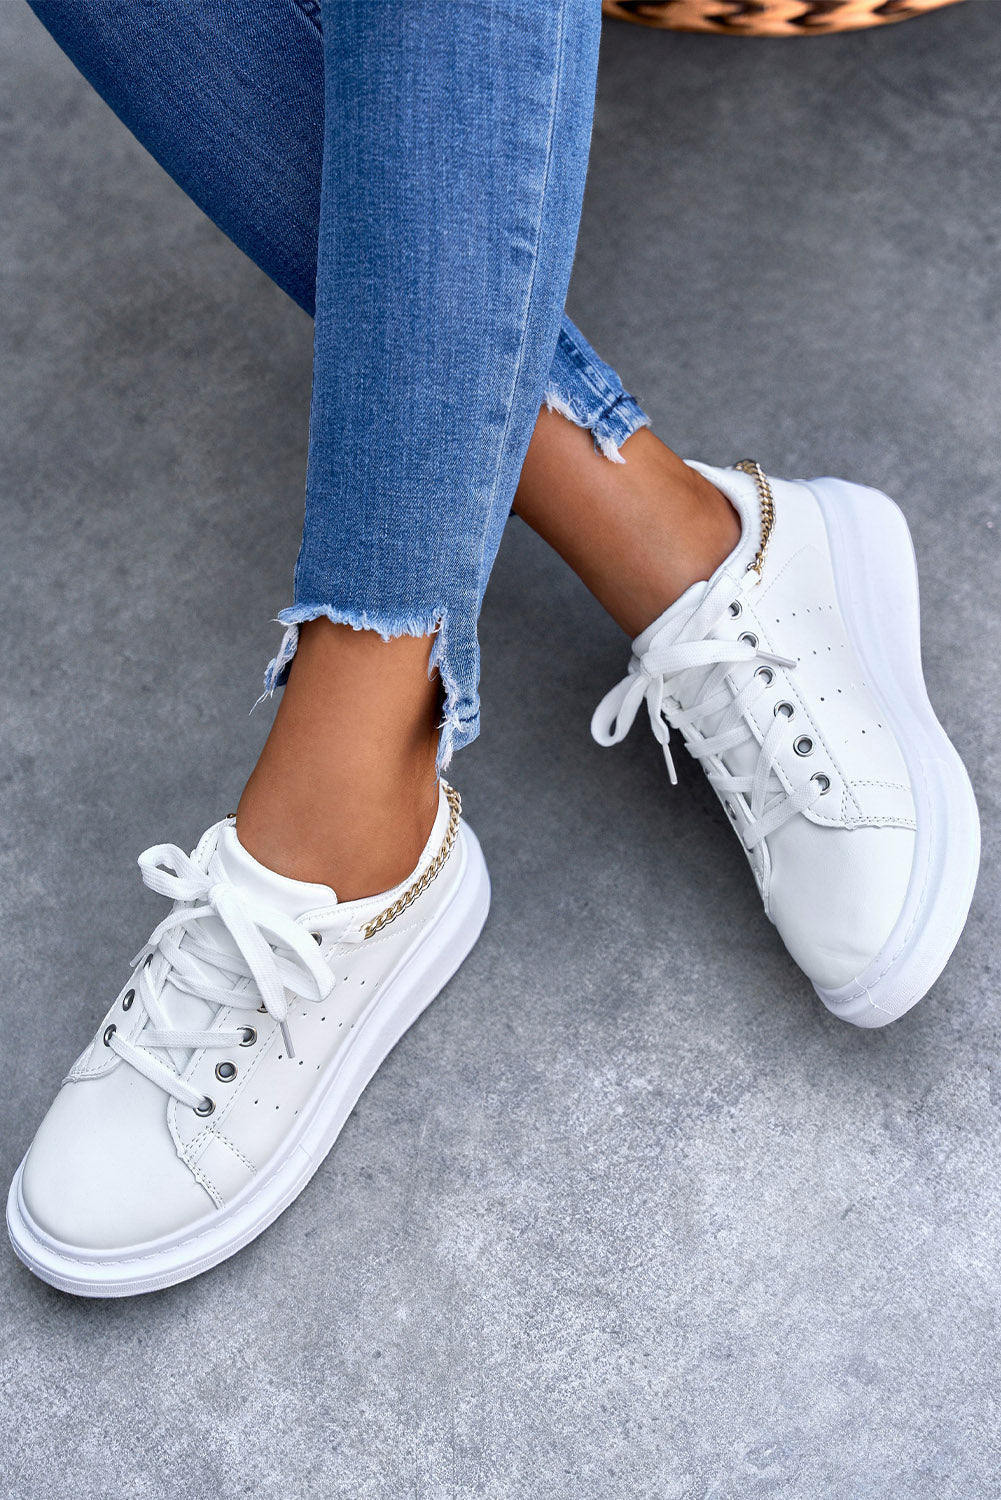 PU Leather Lace up Sneakers